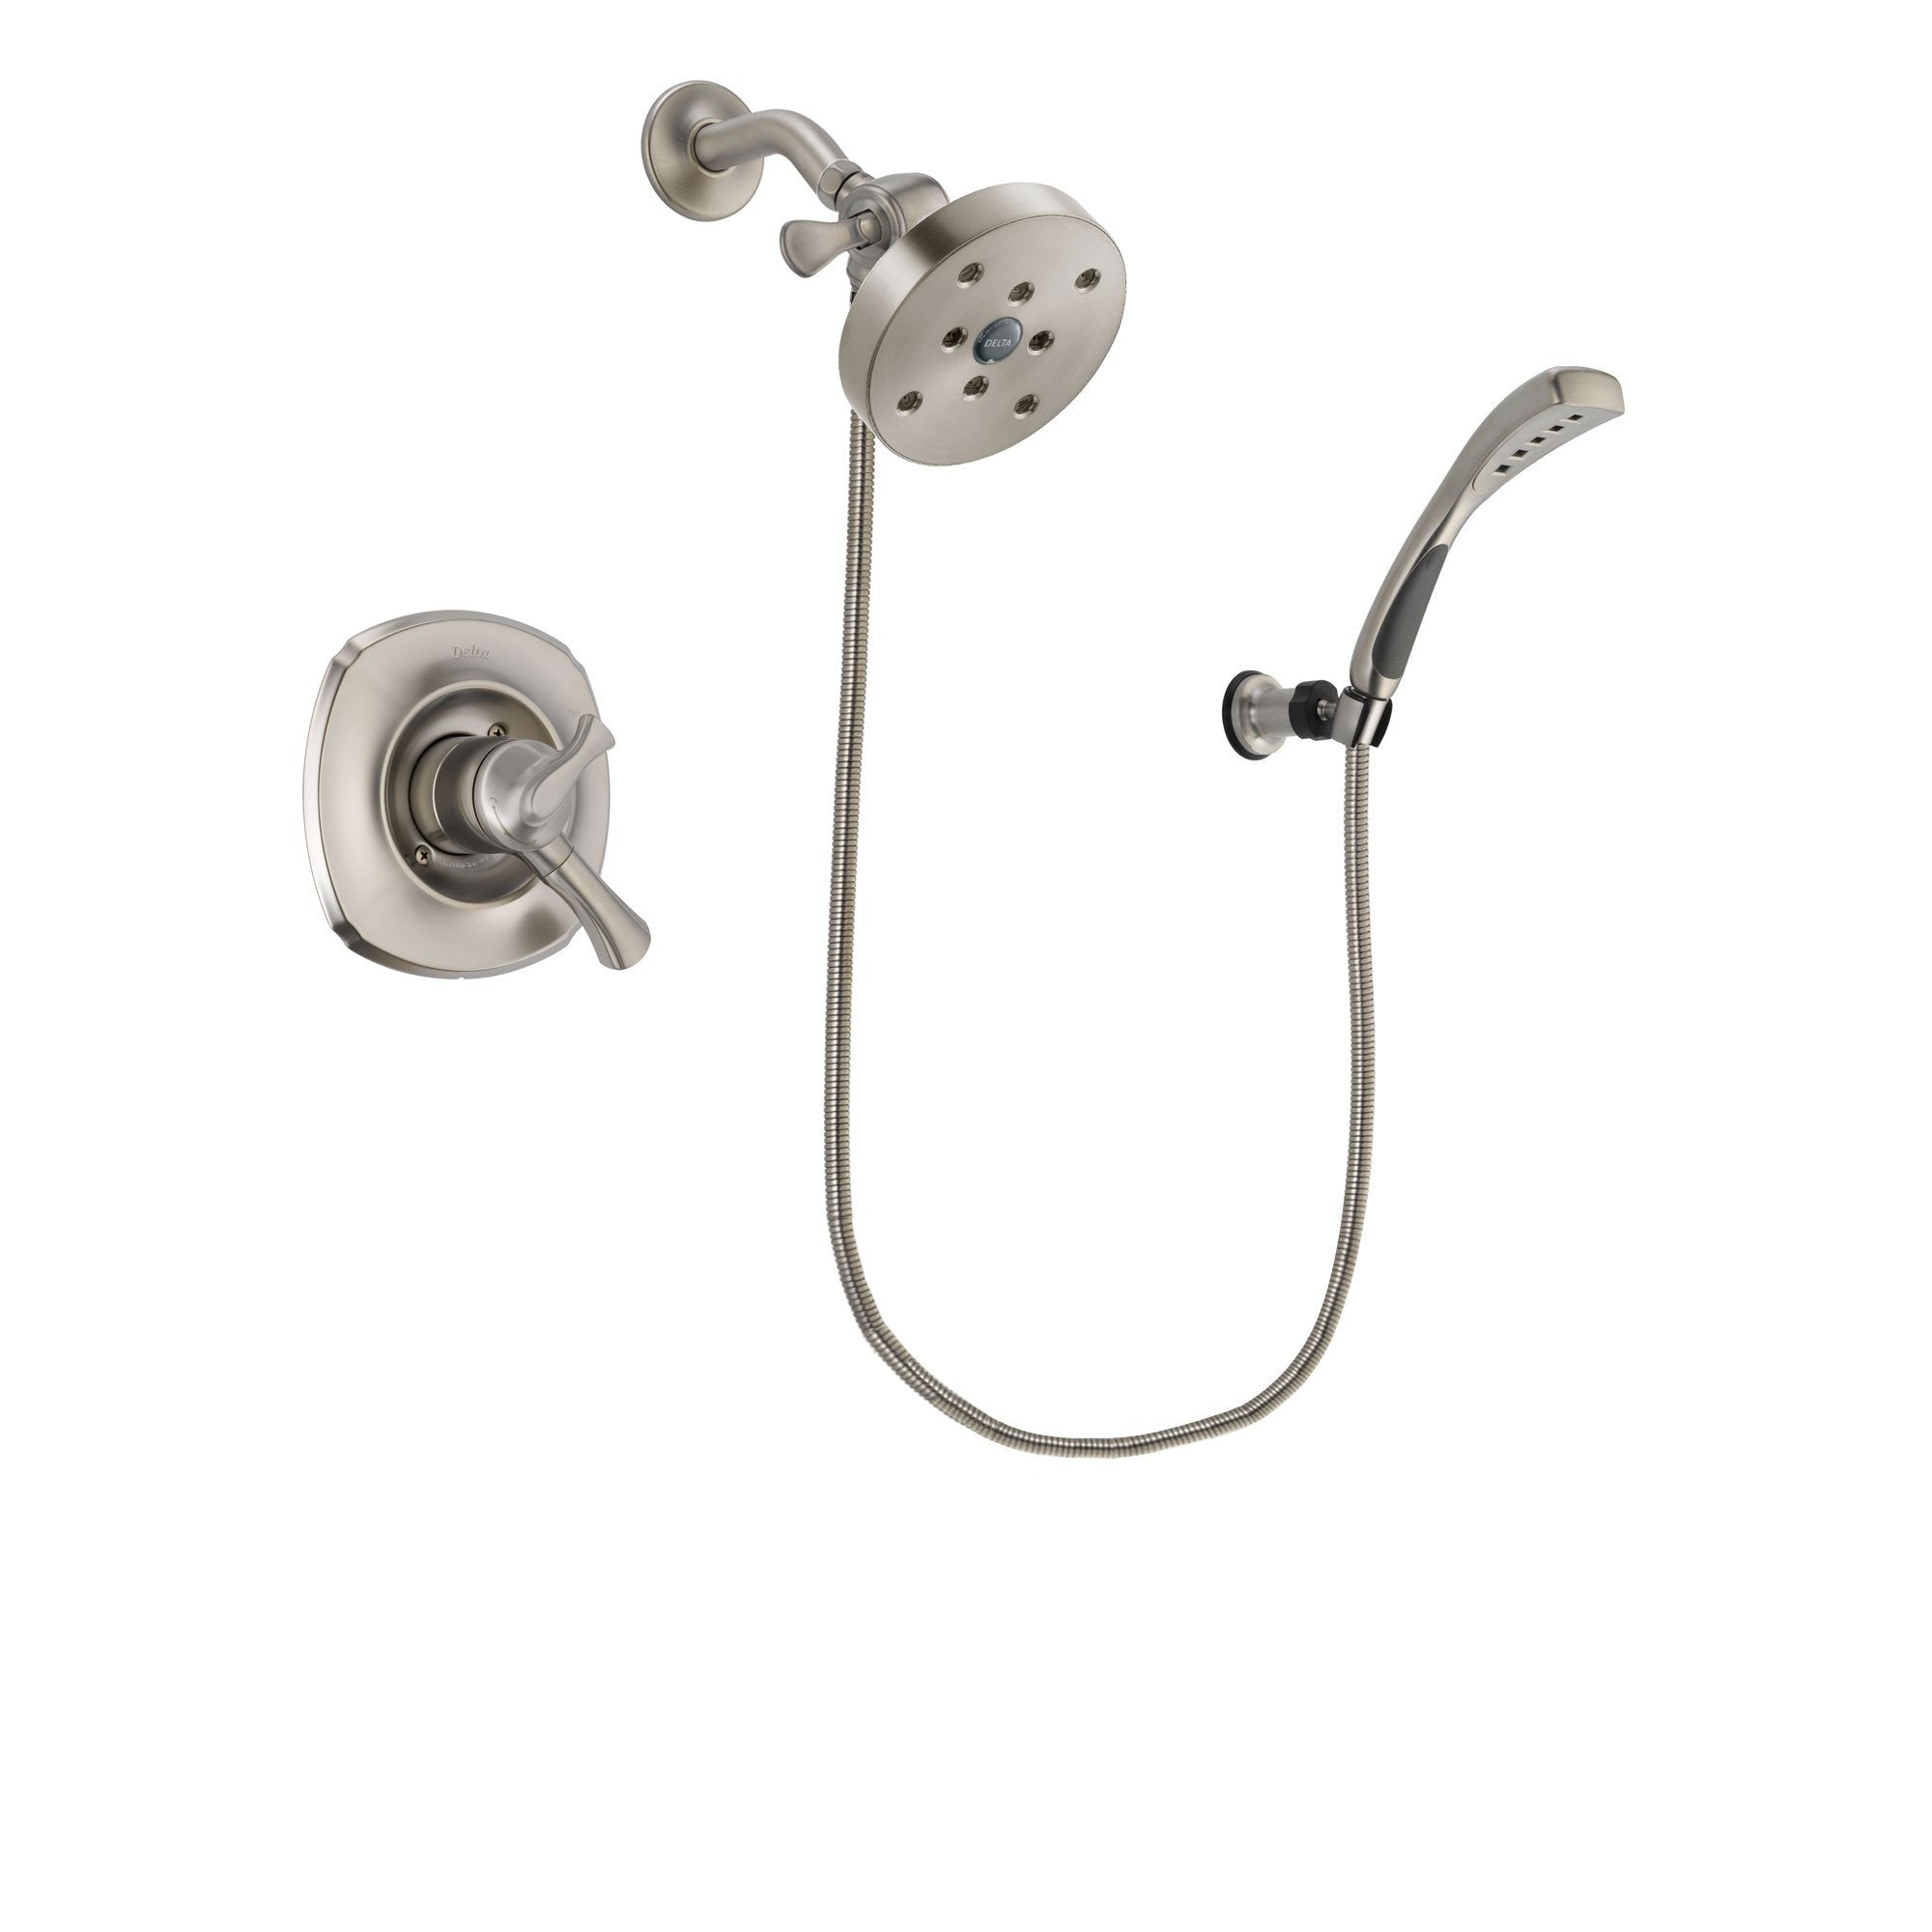 Delta Addison Stainless Steel Finish Dual Control Shower Faucet System Package with 5-1/2 inch Shower Head and Wall Mounted Handshower Includes Rough-in Valve DSP1916V